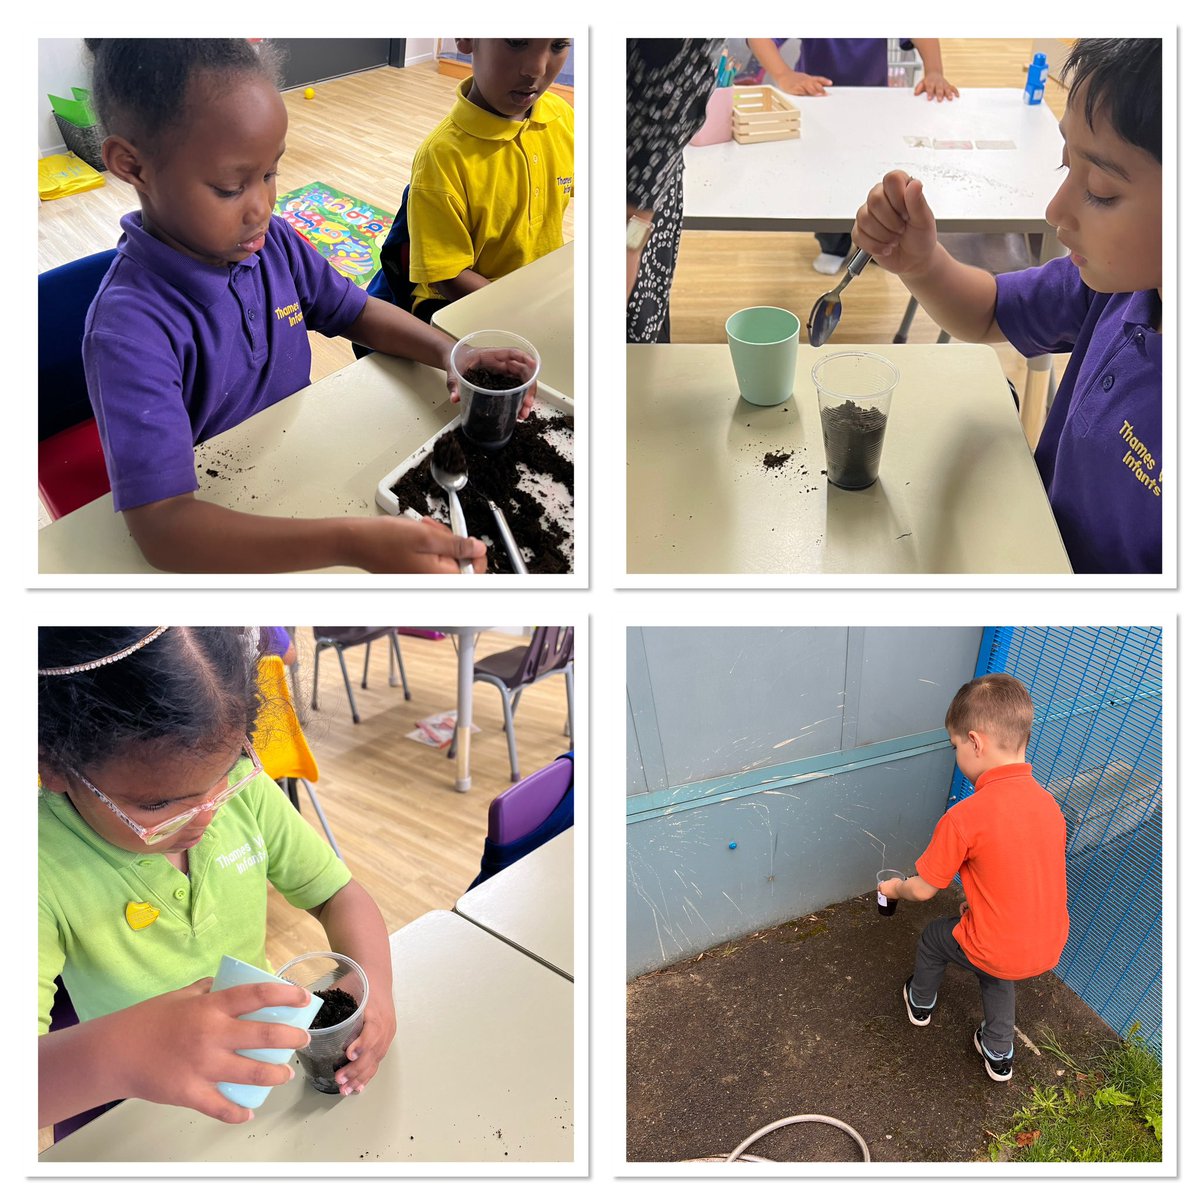 Today in Science children learnt what plants need to help them grow. They then planted their own seed, watered it and placed it outside for it to get some sunshine! We can’t wait to see it grow 🌻@RebeccaolleyTVI @TVInfants @AdamDobsonTVI